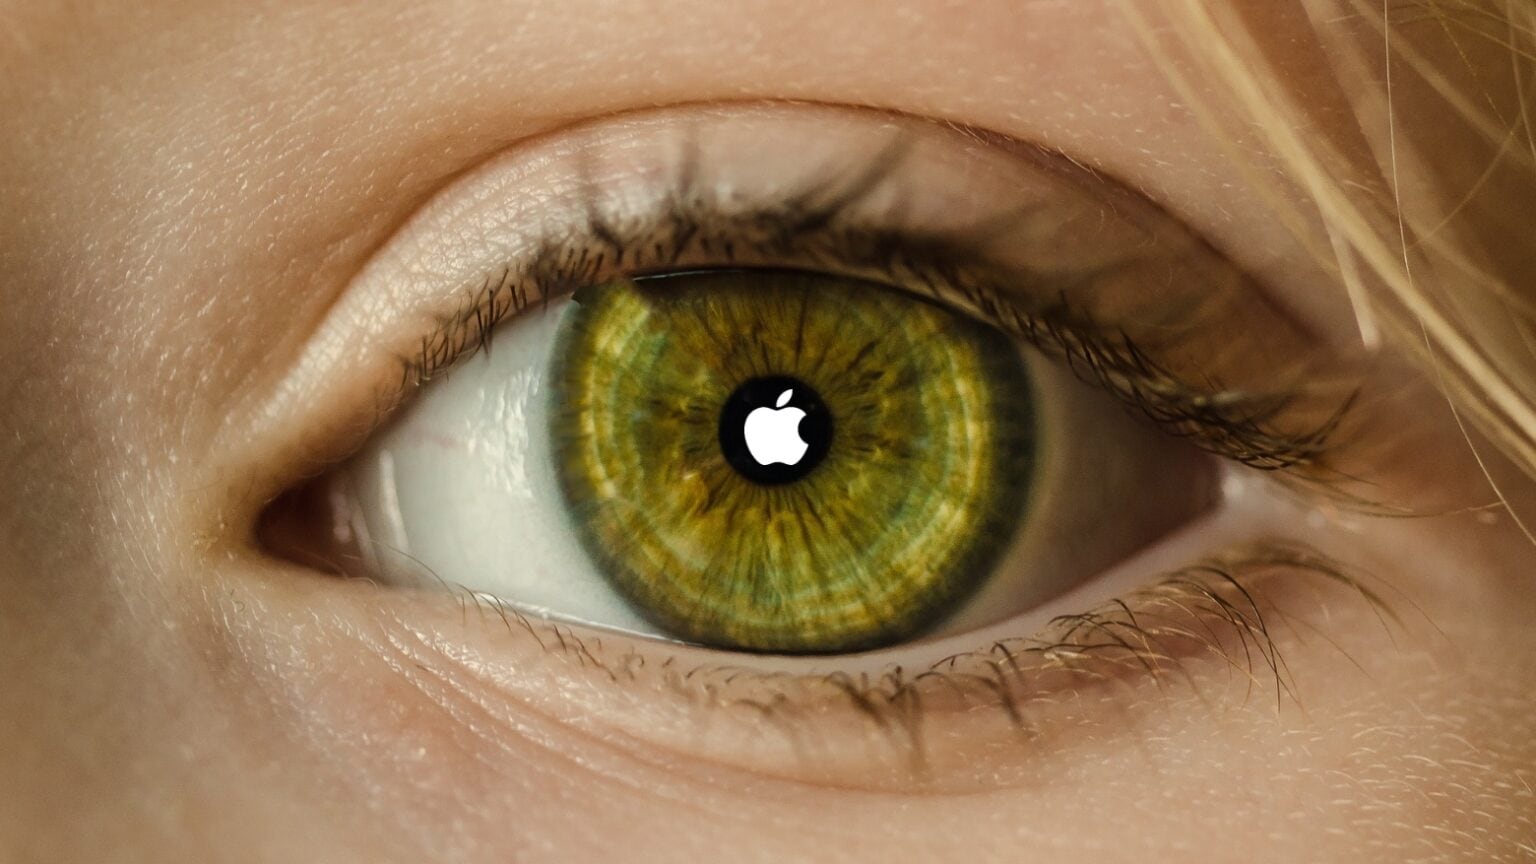 The eventual culmination of Apple augmented reality efforts will be AR contact lenses